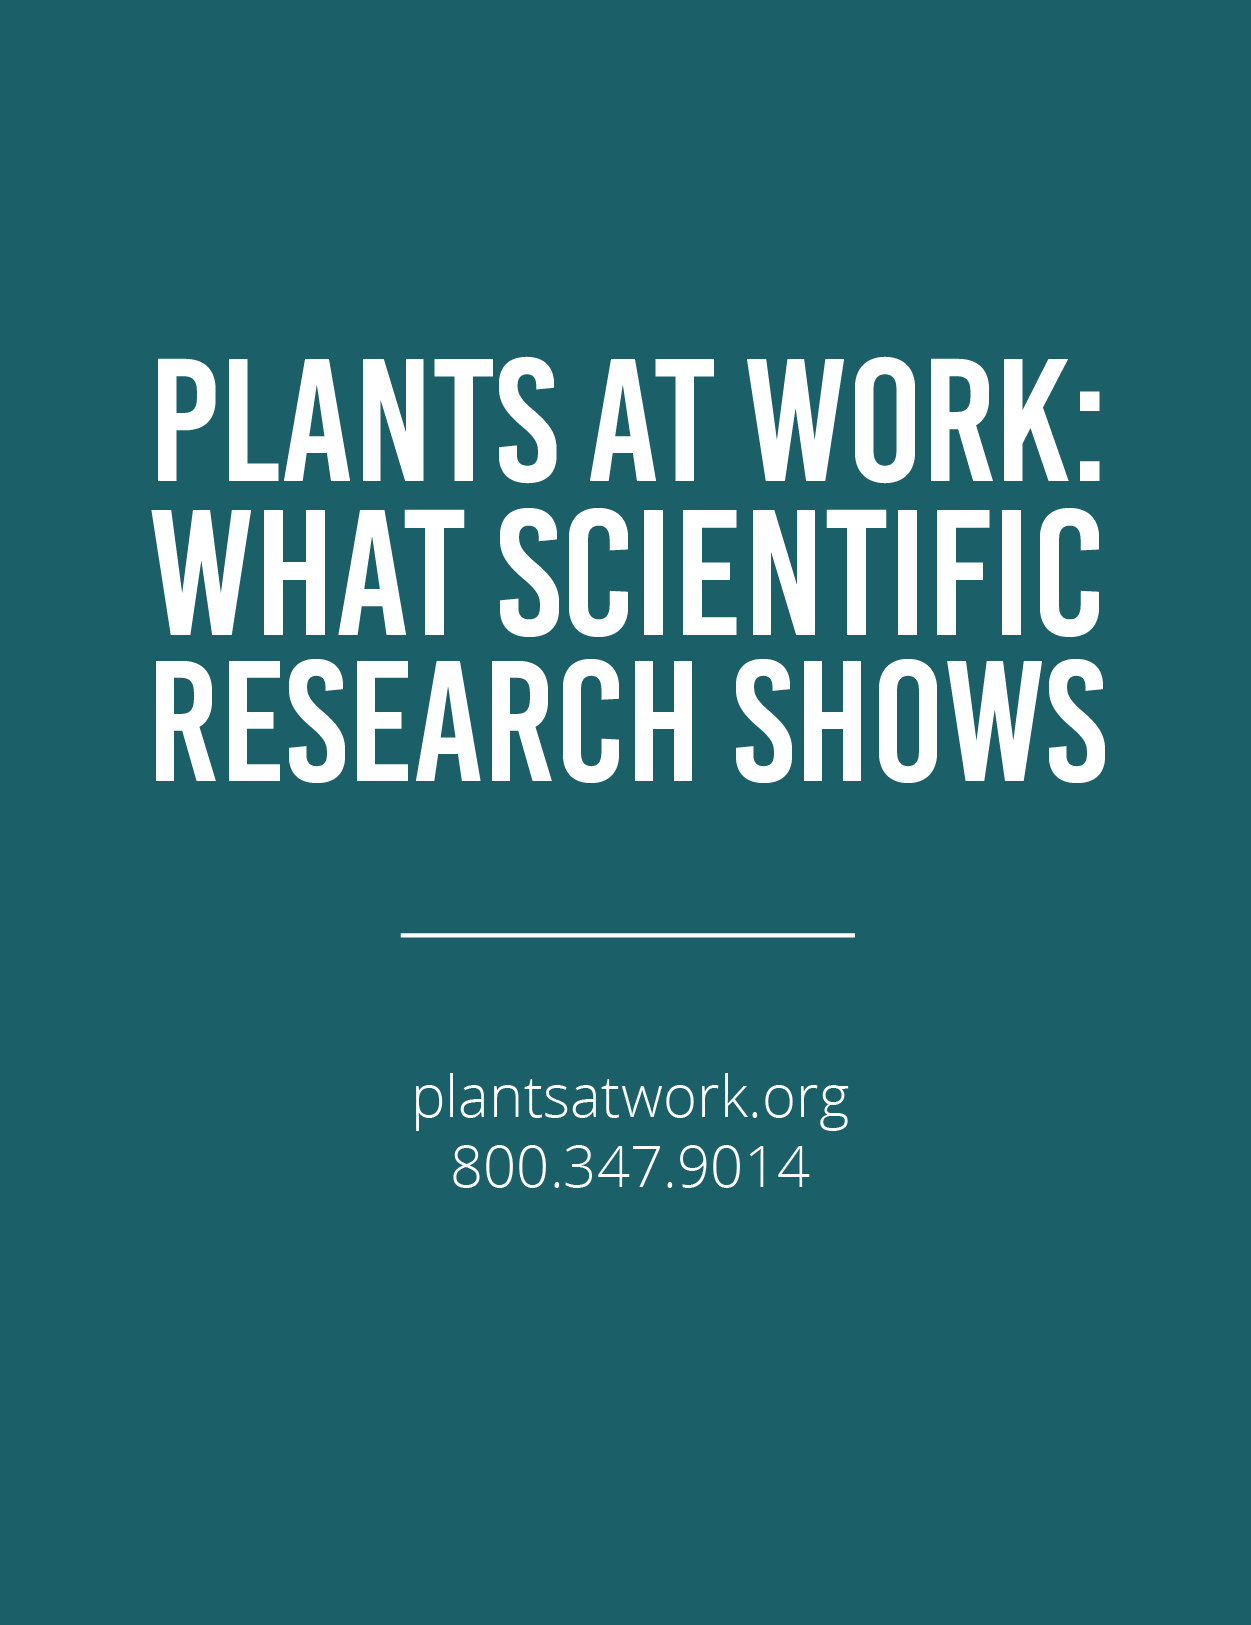 Plants at Work: What Scientific Research ShowsFeatured Image